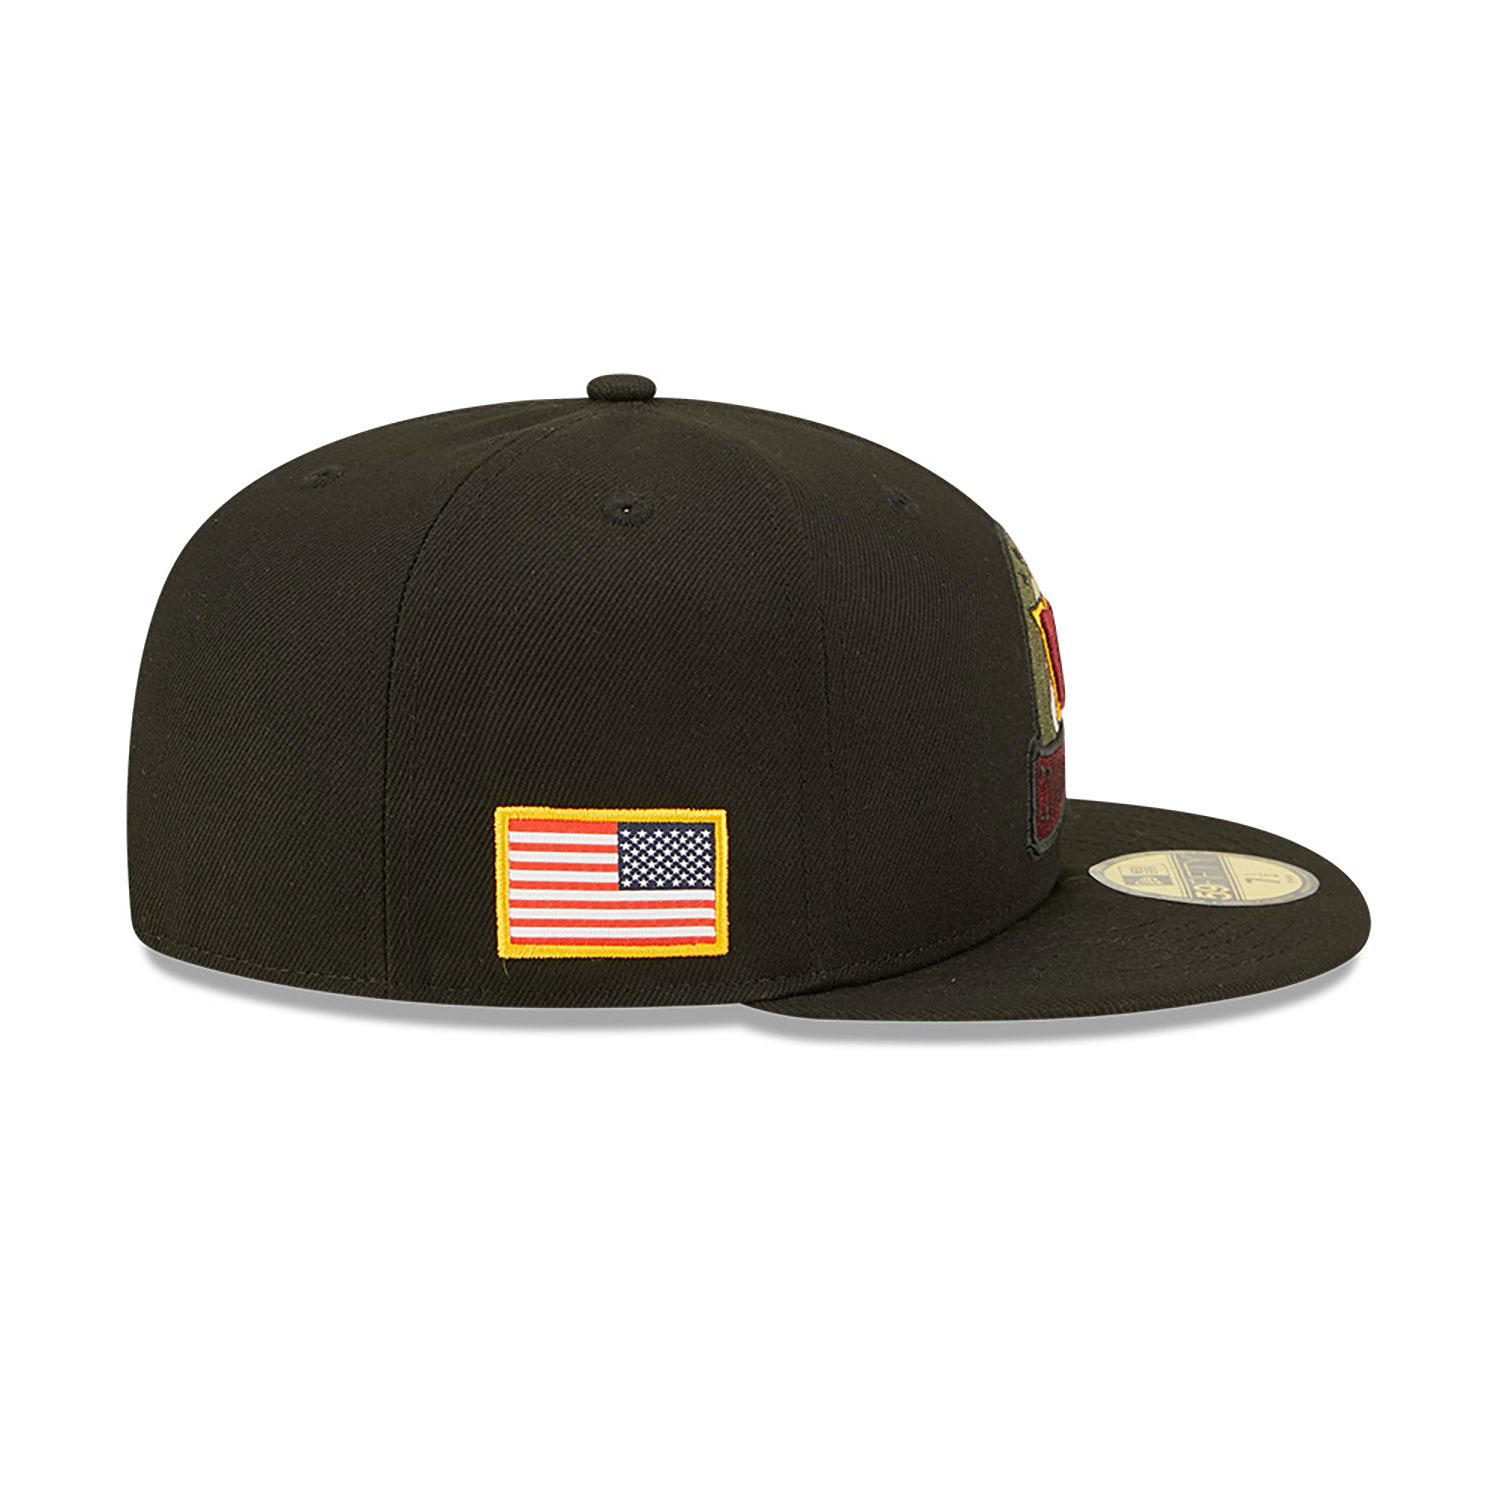 Washington Commanders NFL Salute to Service Black 59FIFTY Fitted Cap